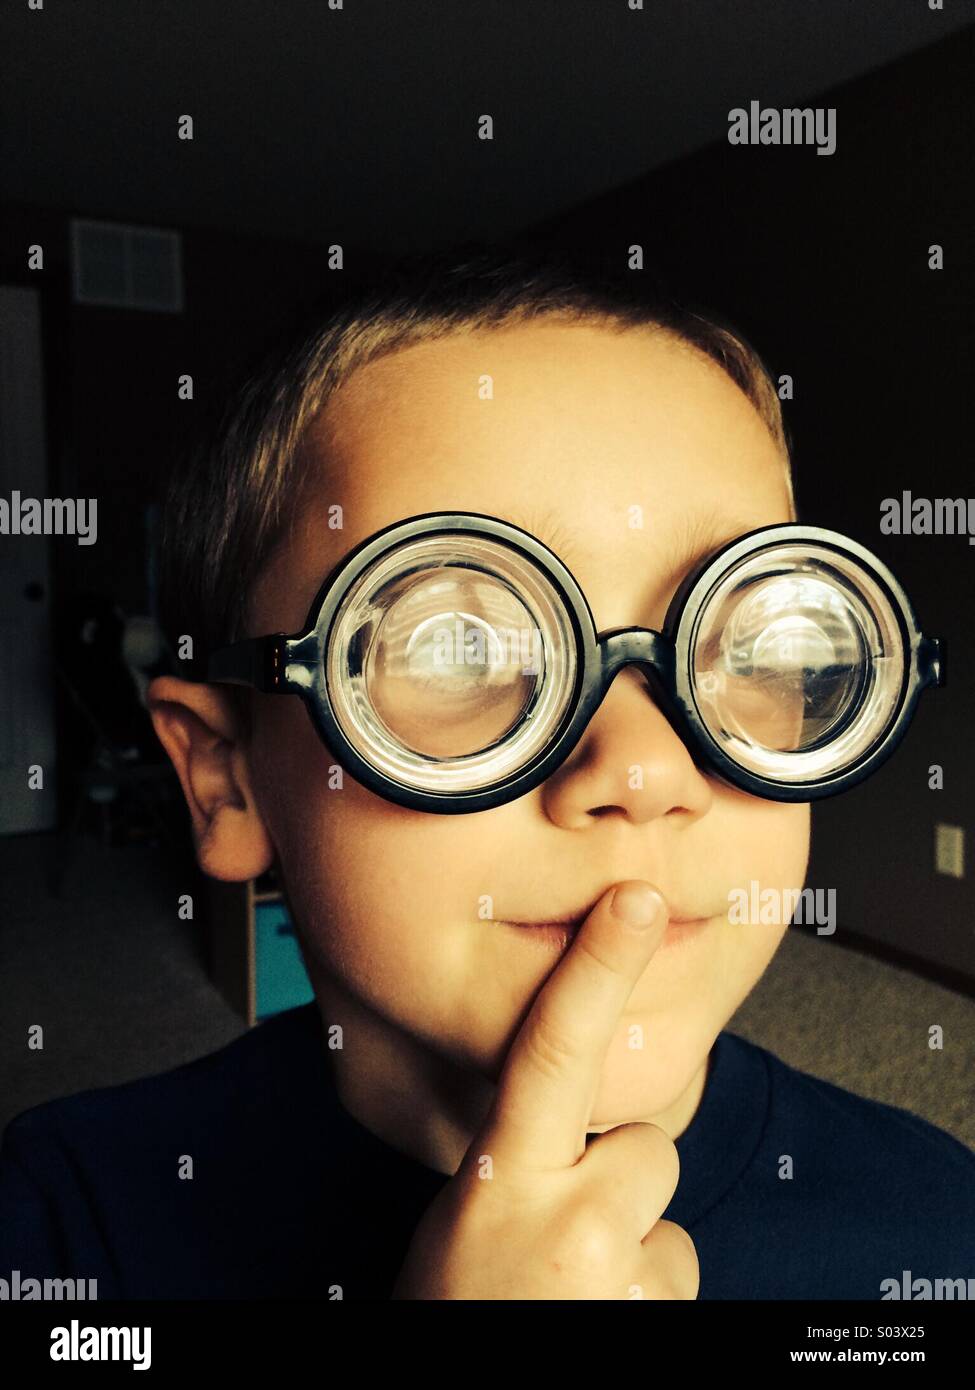 A young boy wearing large glasses contemplates. Stock Photo